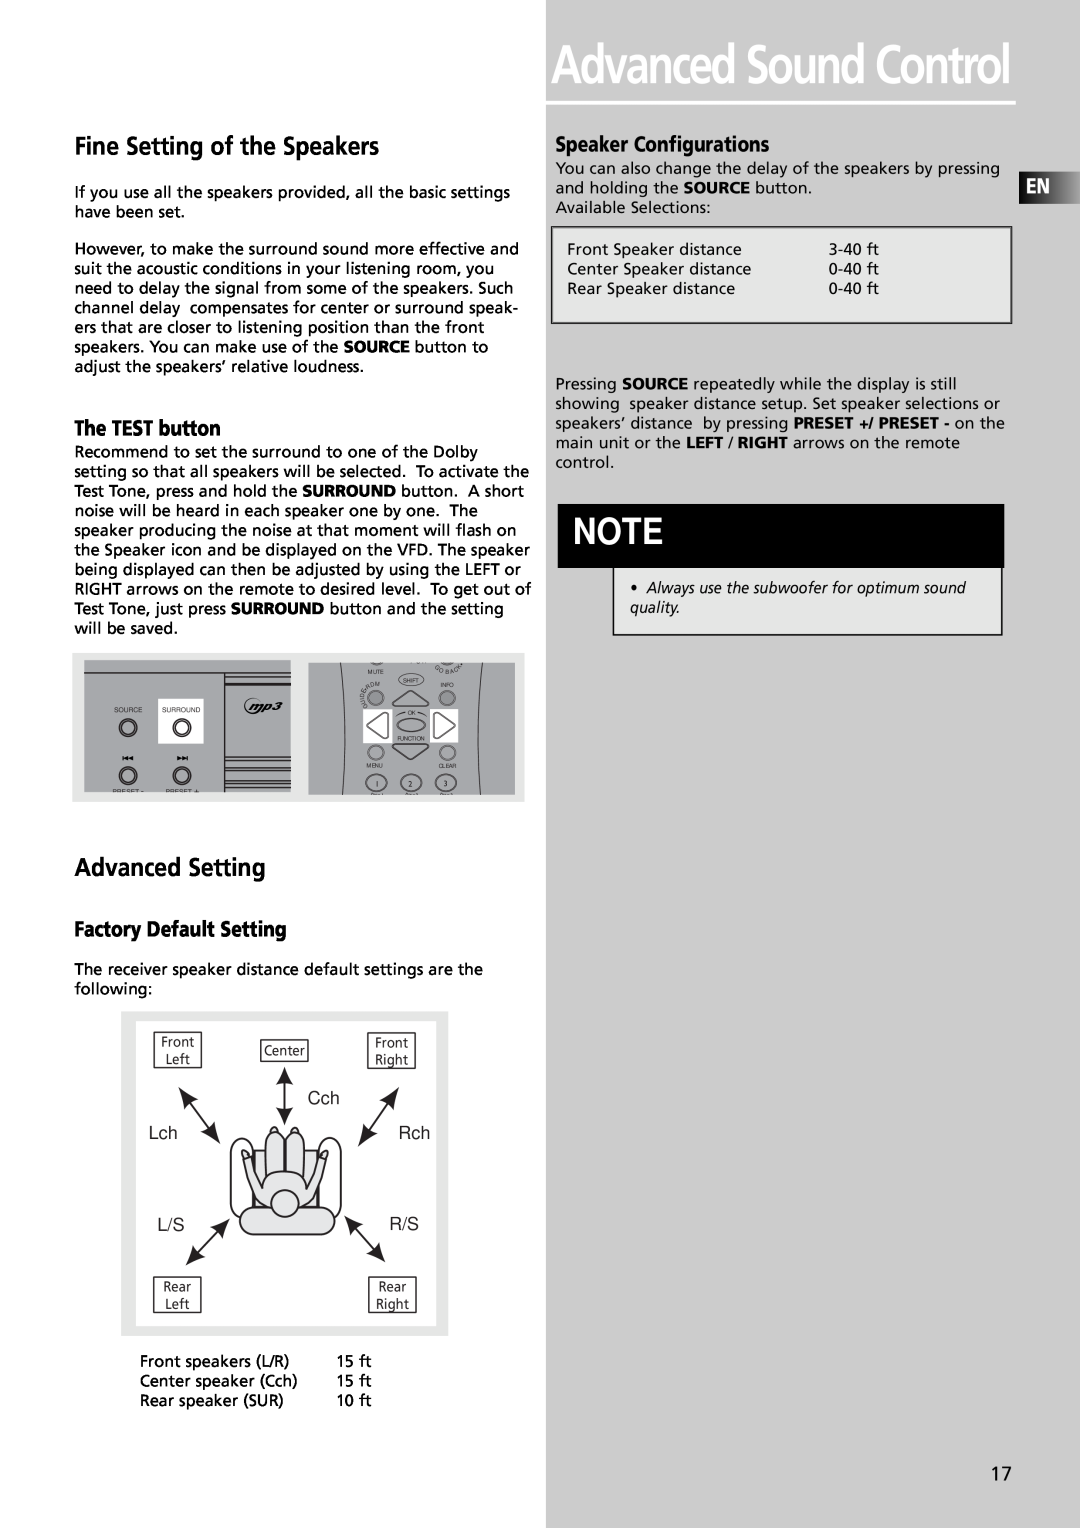 RCA RTDVD1 Fine Setting of the Speakers, The TEST button, Speaker Configurations, Factory Default Setting, Lch L/S 